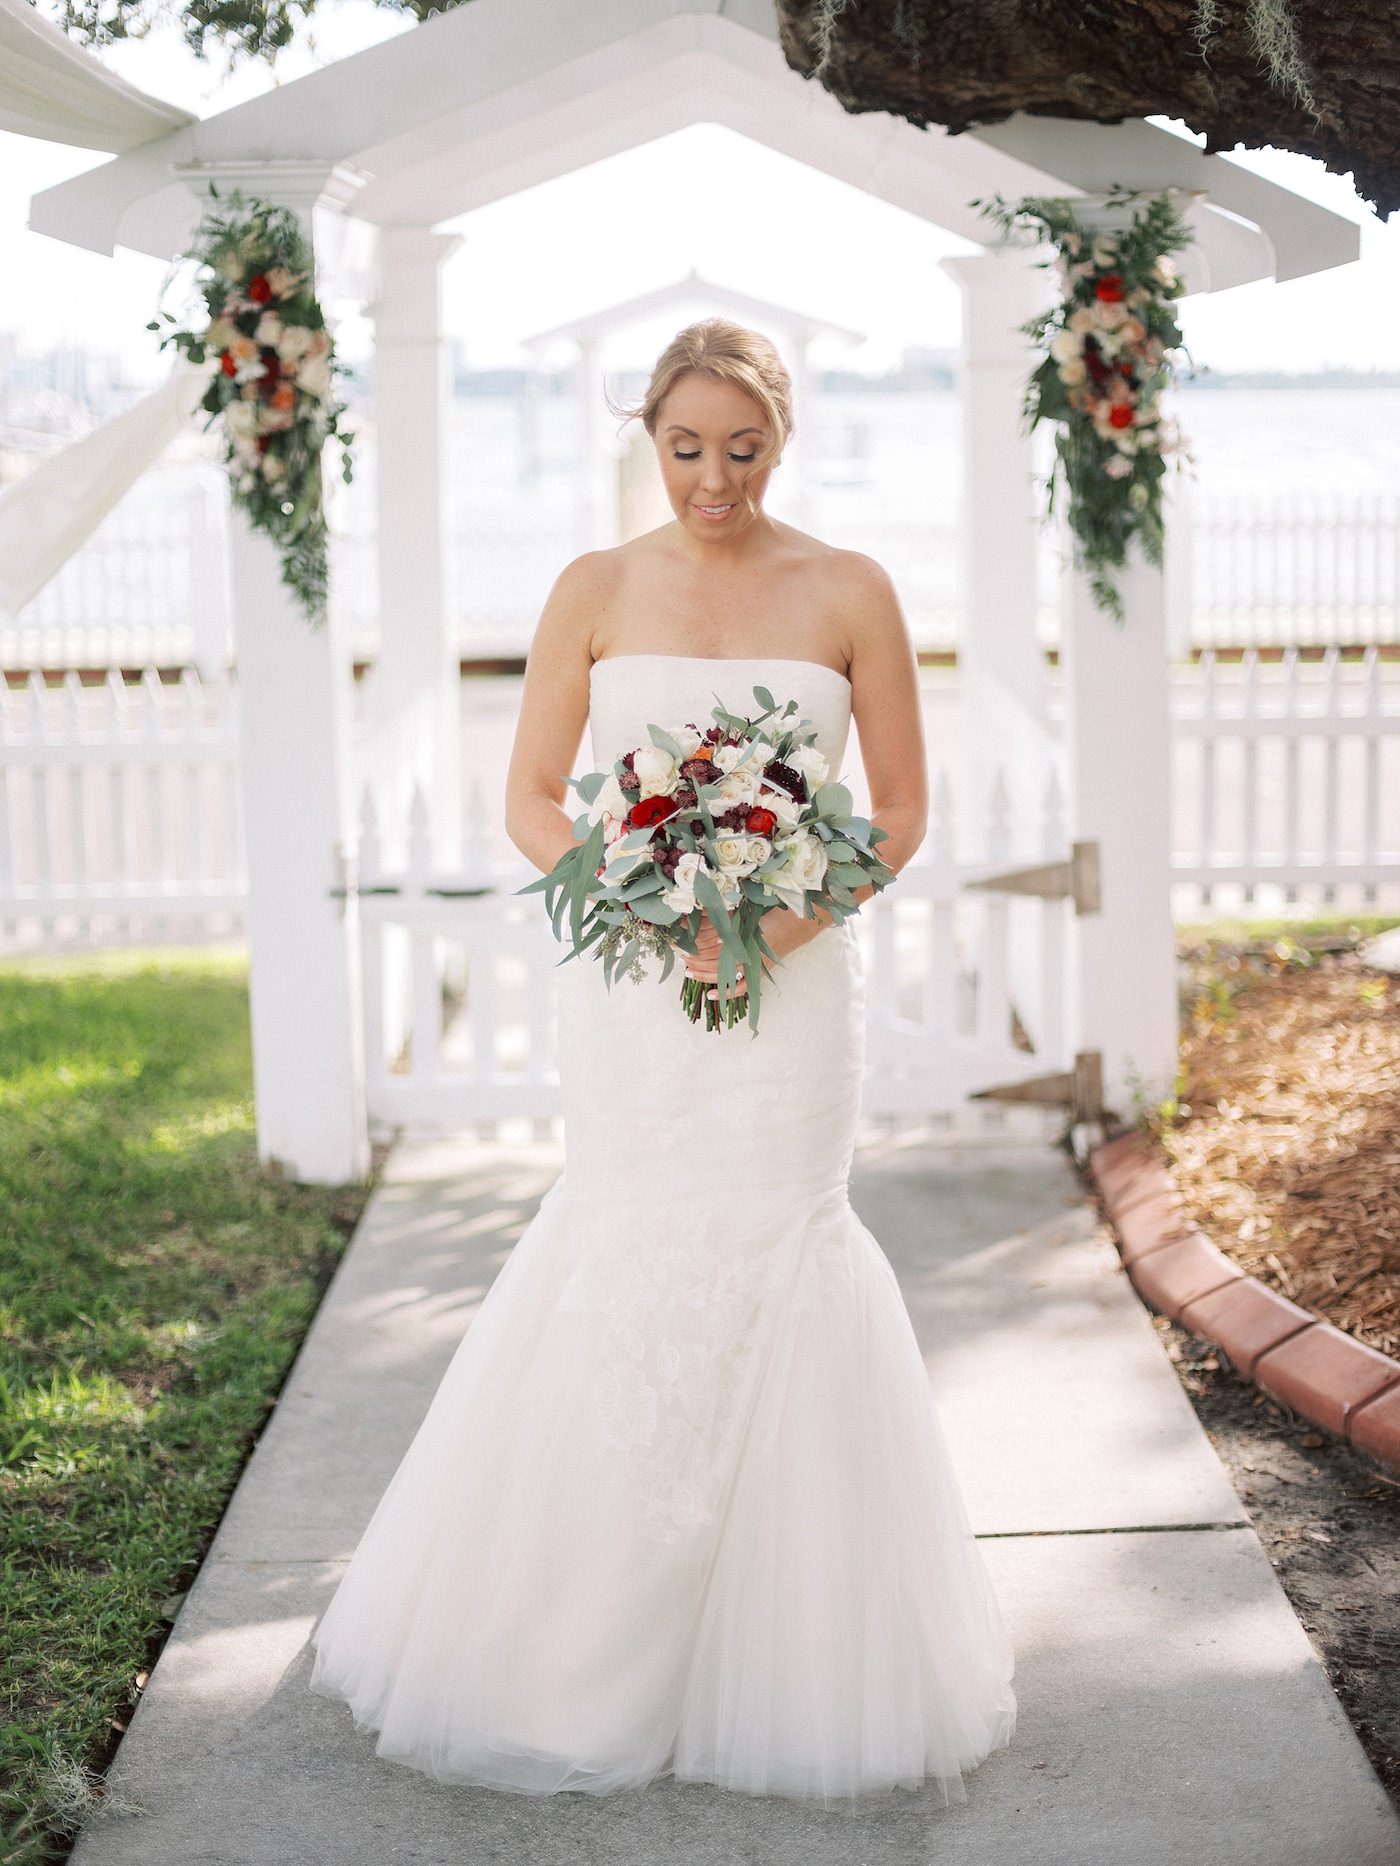 Strapless Ivory Tulle Rouched Mermaid Vera Wang Bridal Gown with Rhinestone Beaded Sash Waistband | Burgundy Wine Bordeaux Red and White Bridal Bouquet with Eucalyptus Greenery by Tampa Wedding Florist Brides N Blooms | Florida Fall Autumn Wedding Waterfront Venue